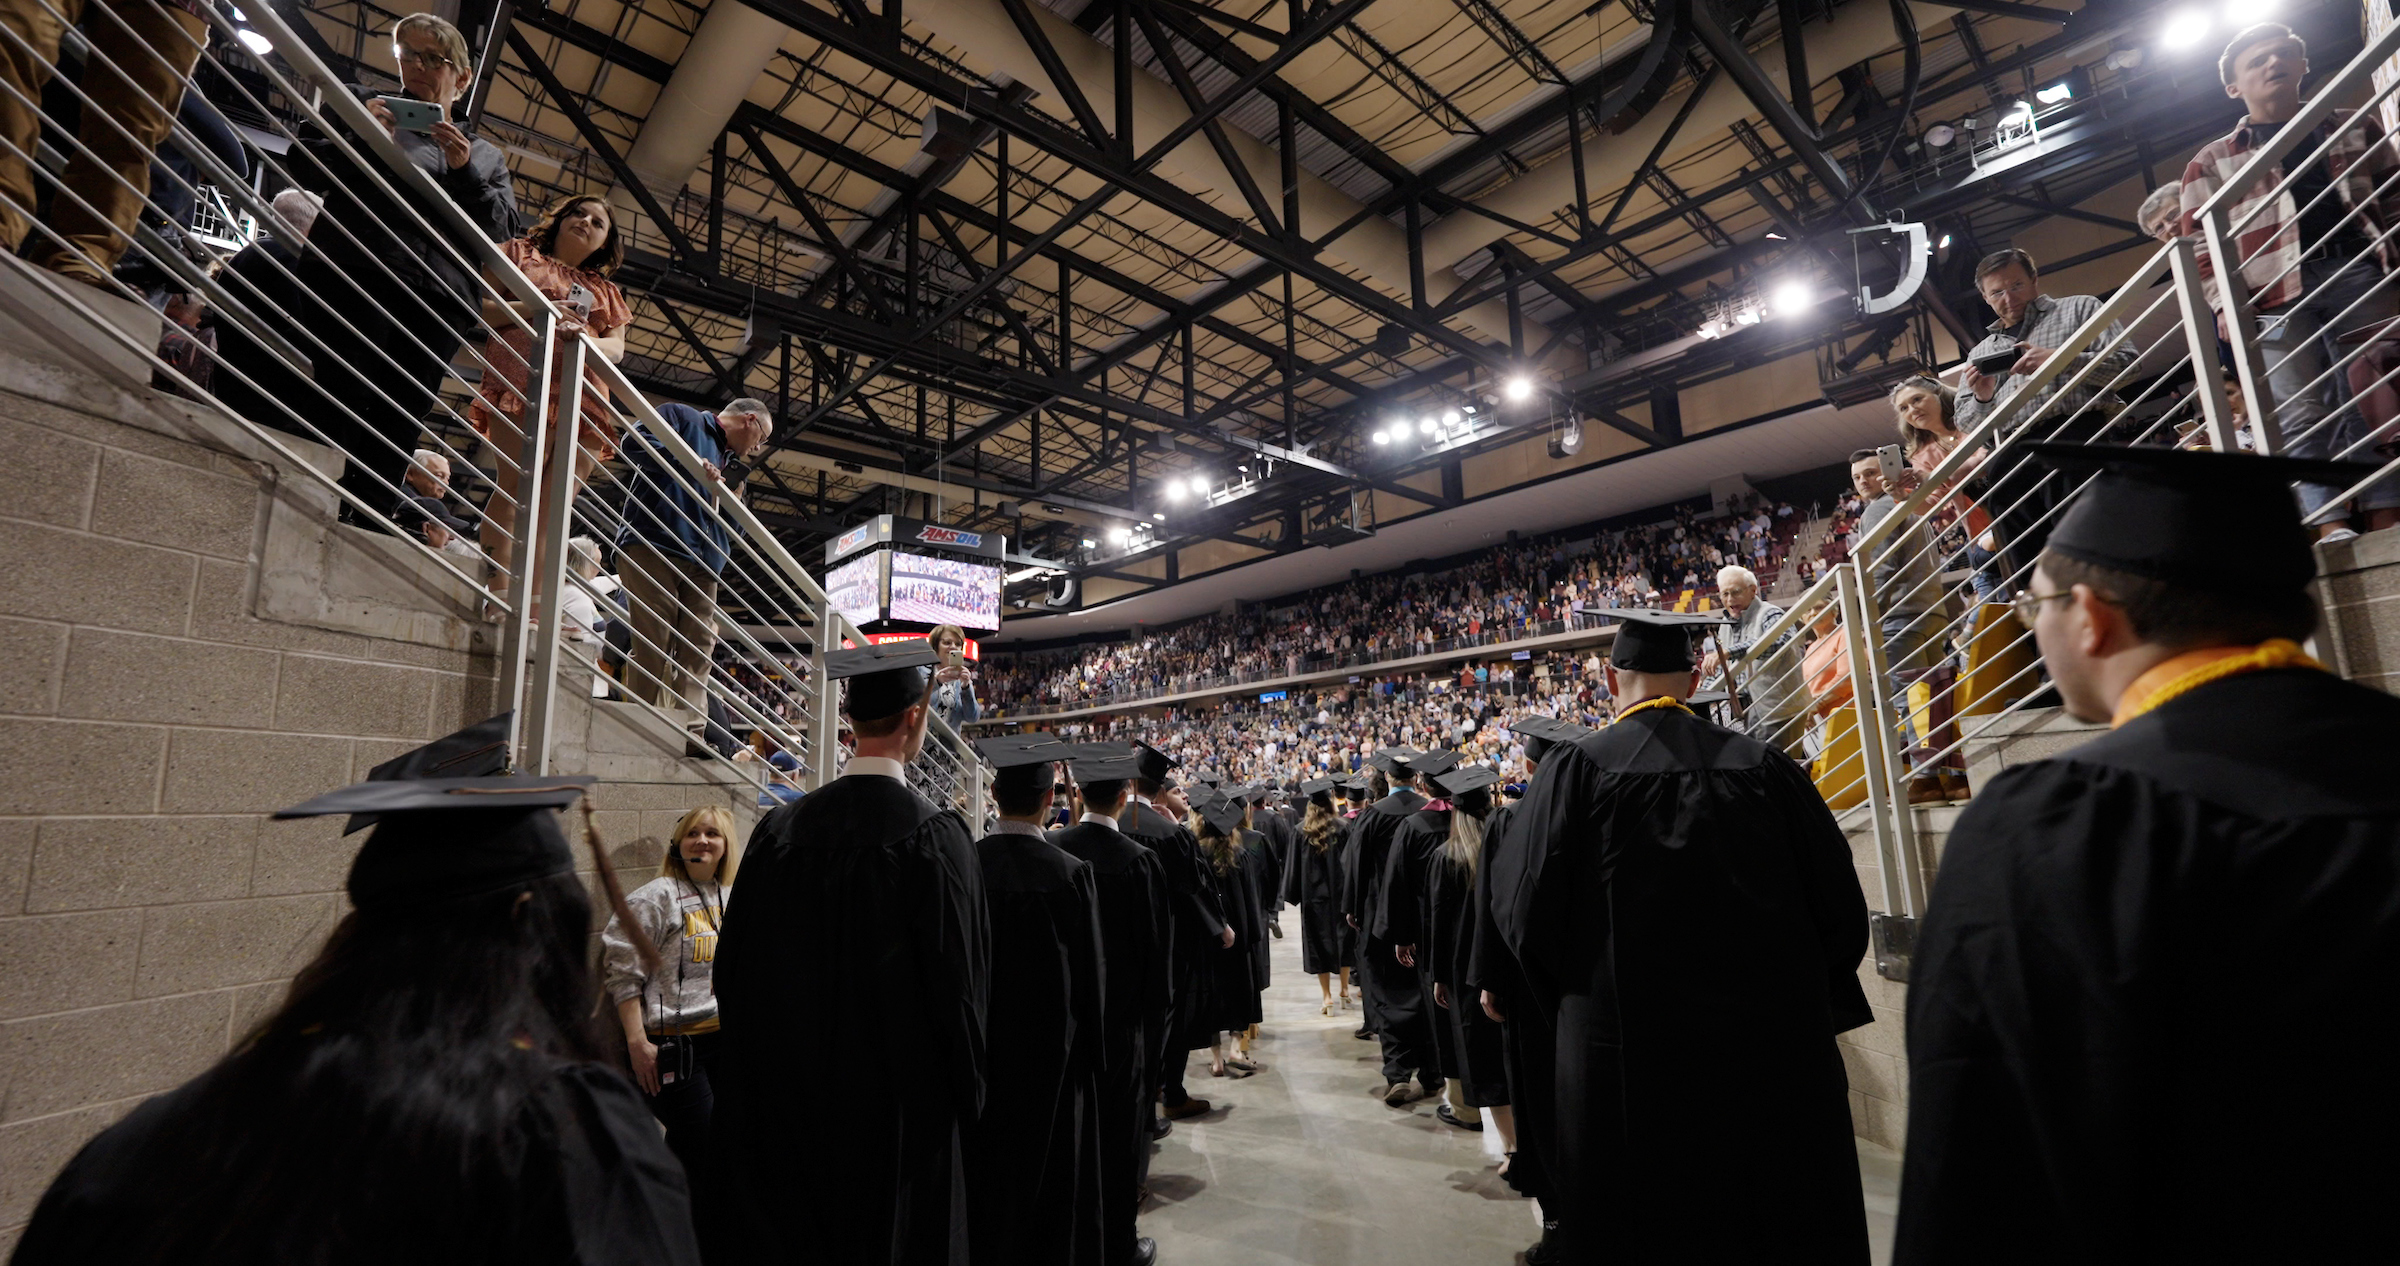 Graduating students in cap and gown in two lines waiting to enter the arena.